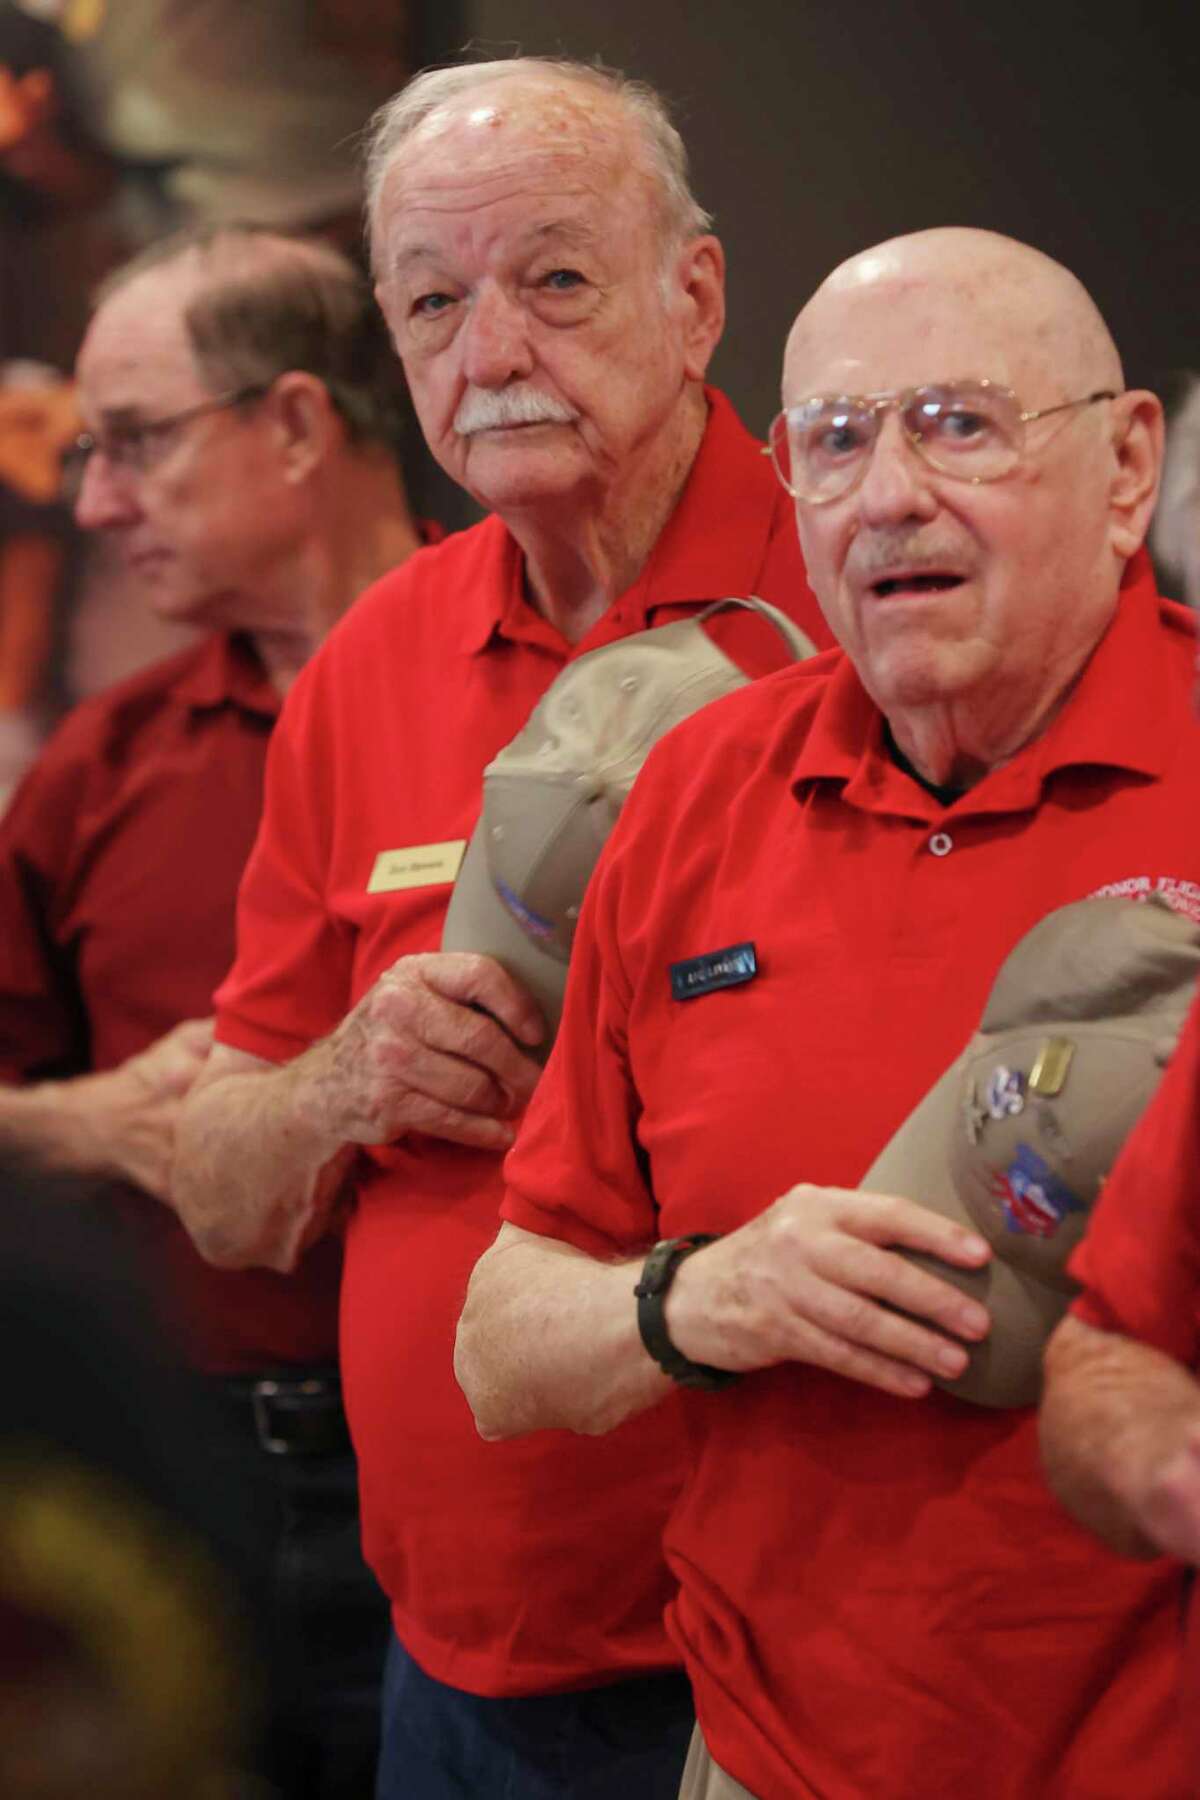 Navy veteran Don Stevens, 90, center, recites the Pledge of Allegiance at a monthly breakfast gathering with other veterans in New Braunfels last week. Stevens as a medical corpsman aboard a hospital ship anchored off the coast of Korea. With him are Air Force veterans Dennis Lehr, 69, left, and Richard Lavdar, 84, right.